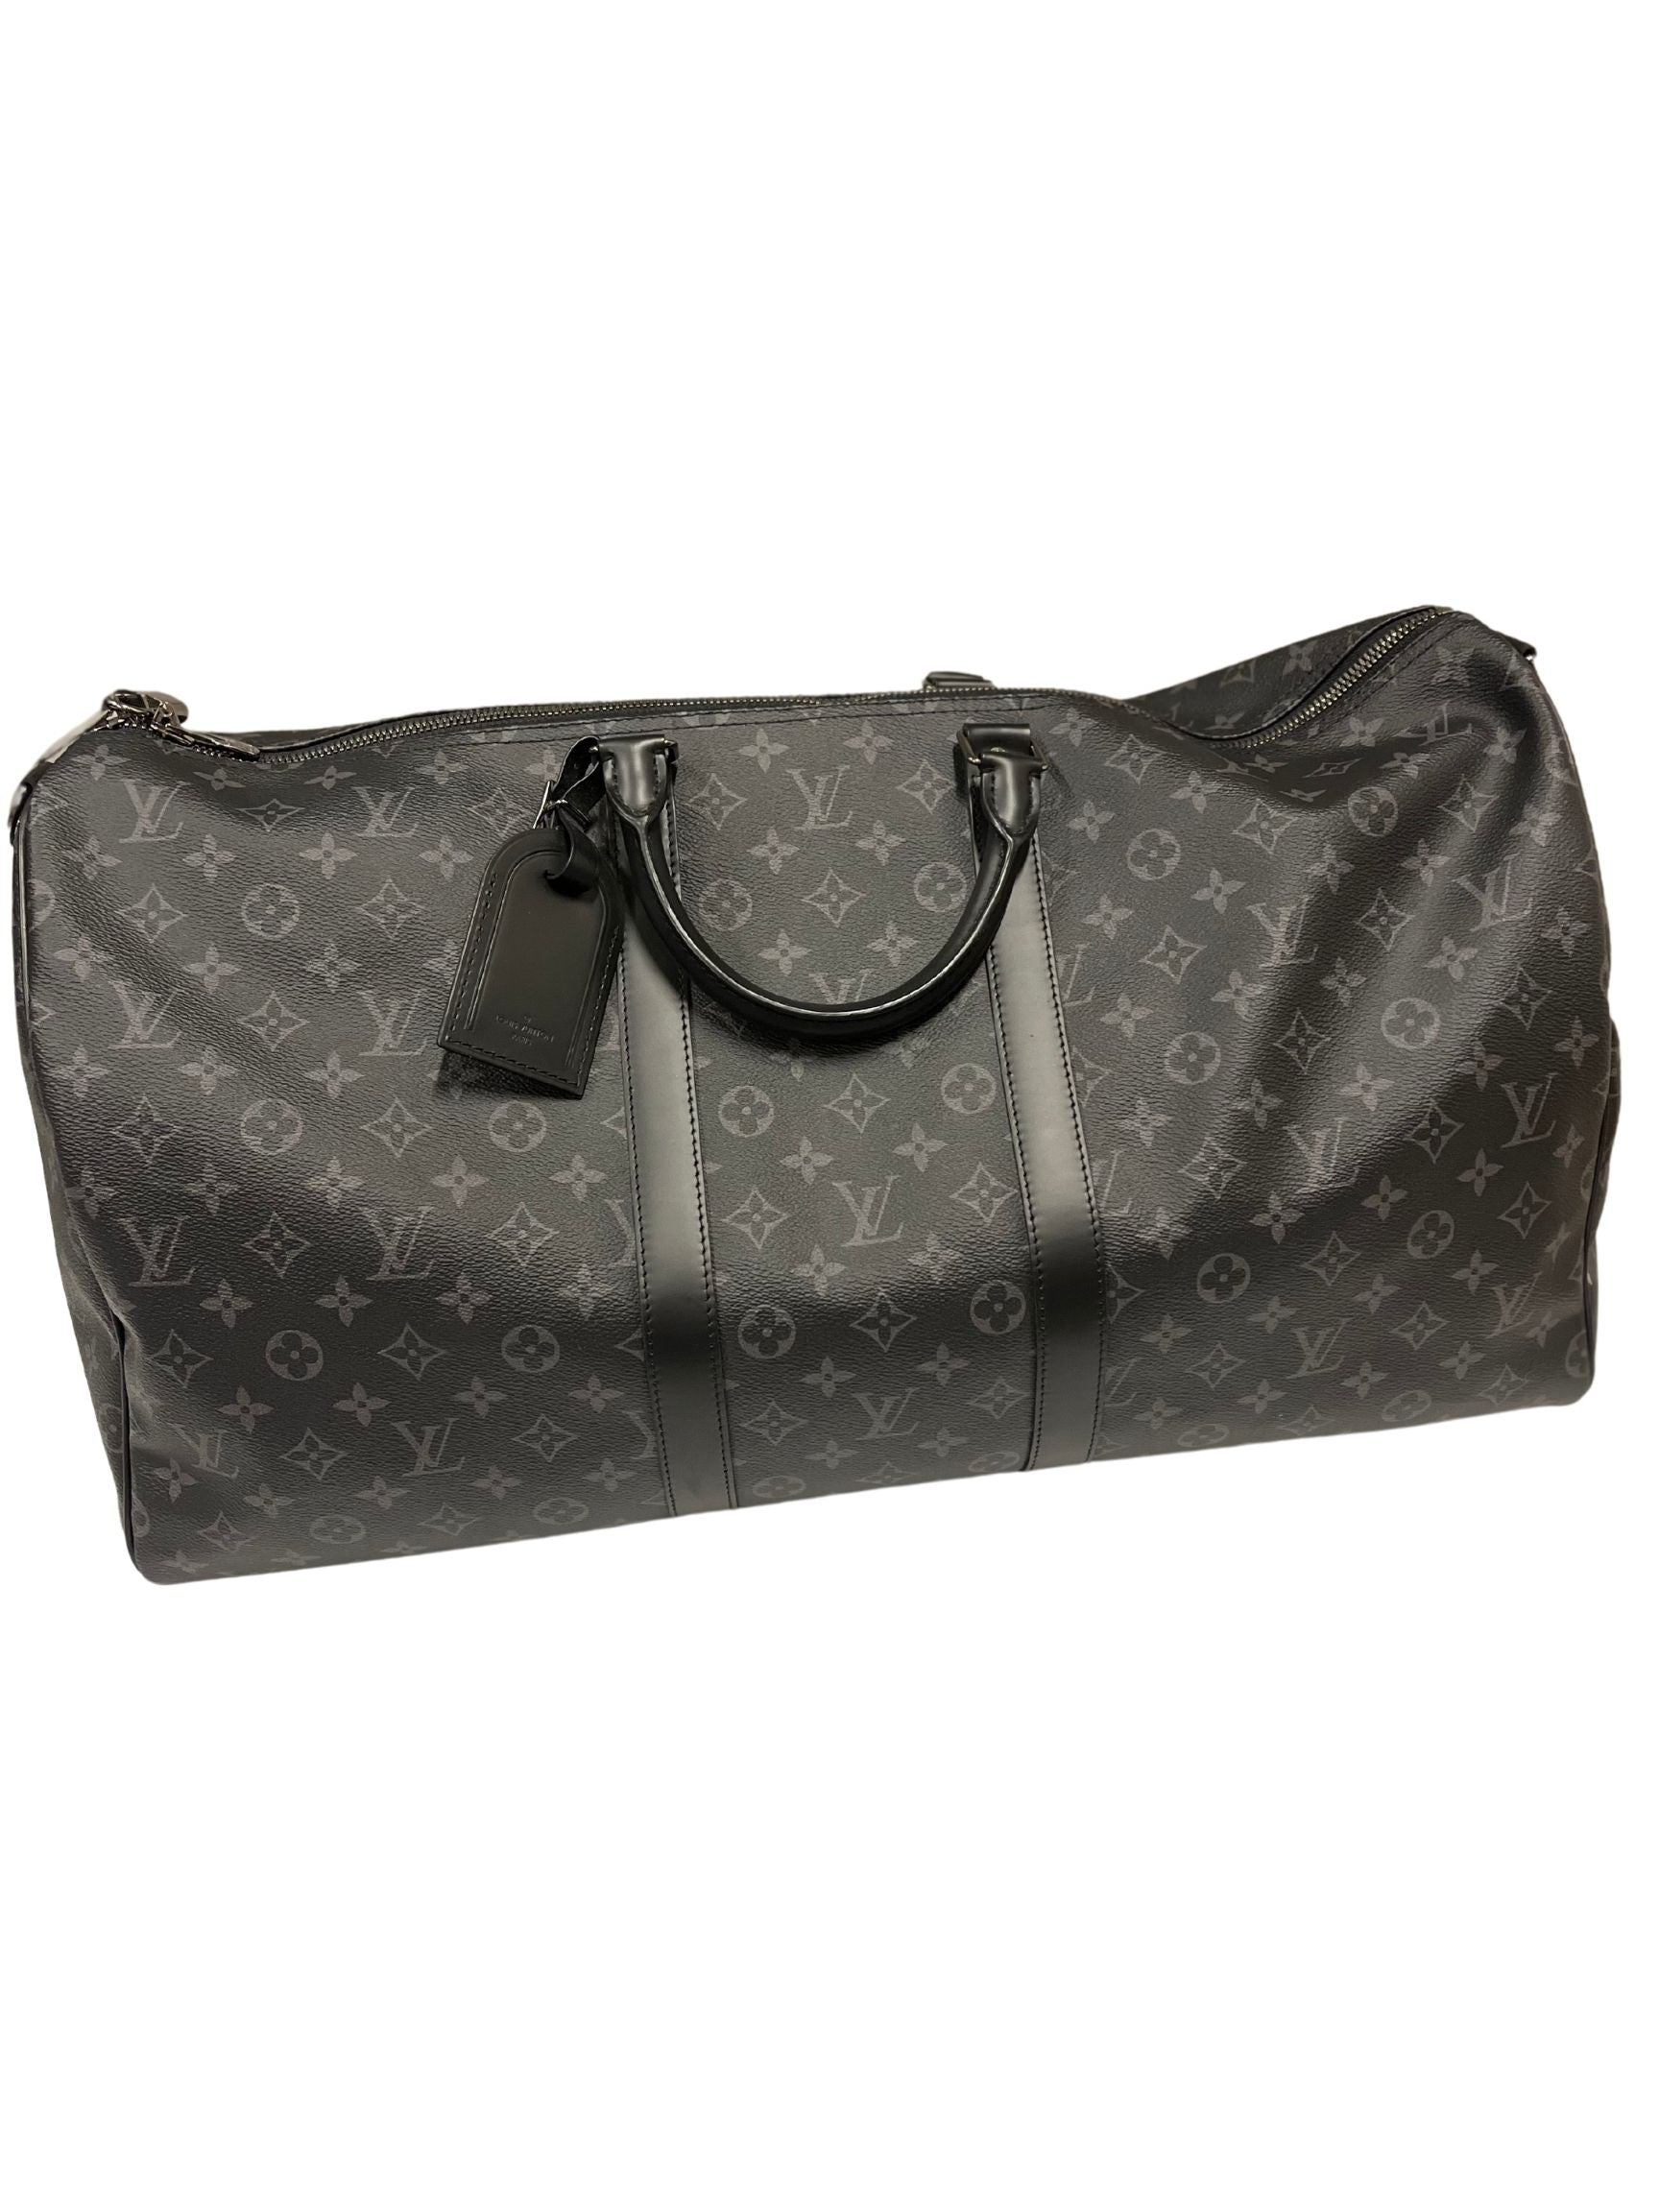 Louis Vuitton Monogram Eclipse Keepall | Coated Canvas | Cowhide Leather Trim | Double Zip Closure | Removable ID Holder | Adjustable, Removable Strap | Double Handles | Interior Zip Pocket | Padlock & Keys | Excellent Condition | Dust Bag Included